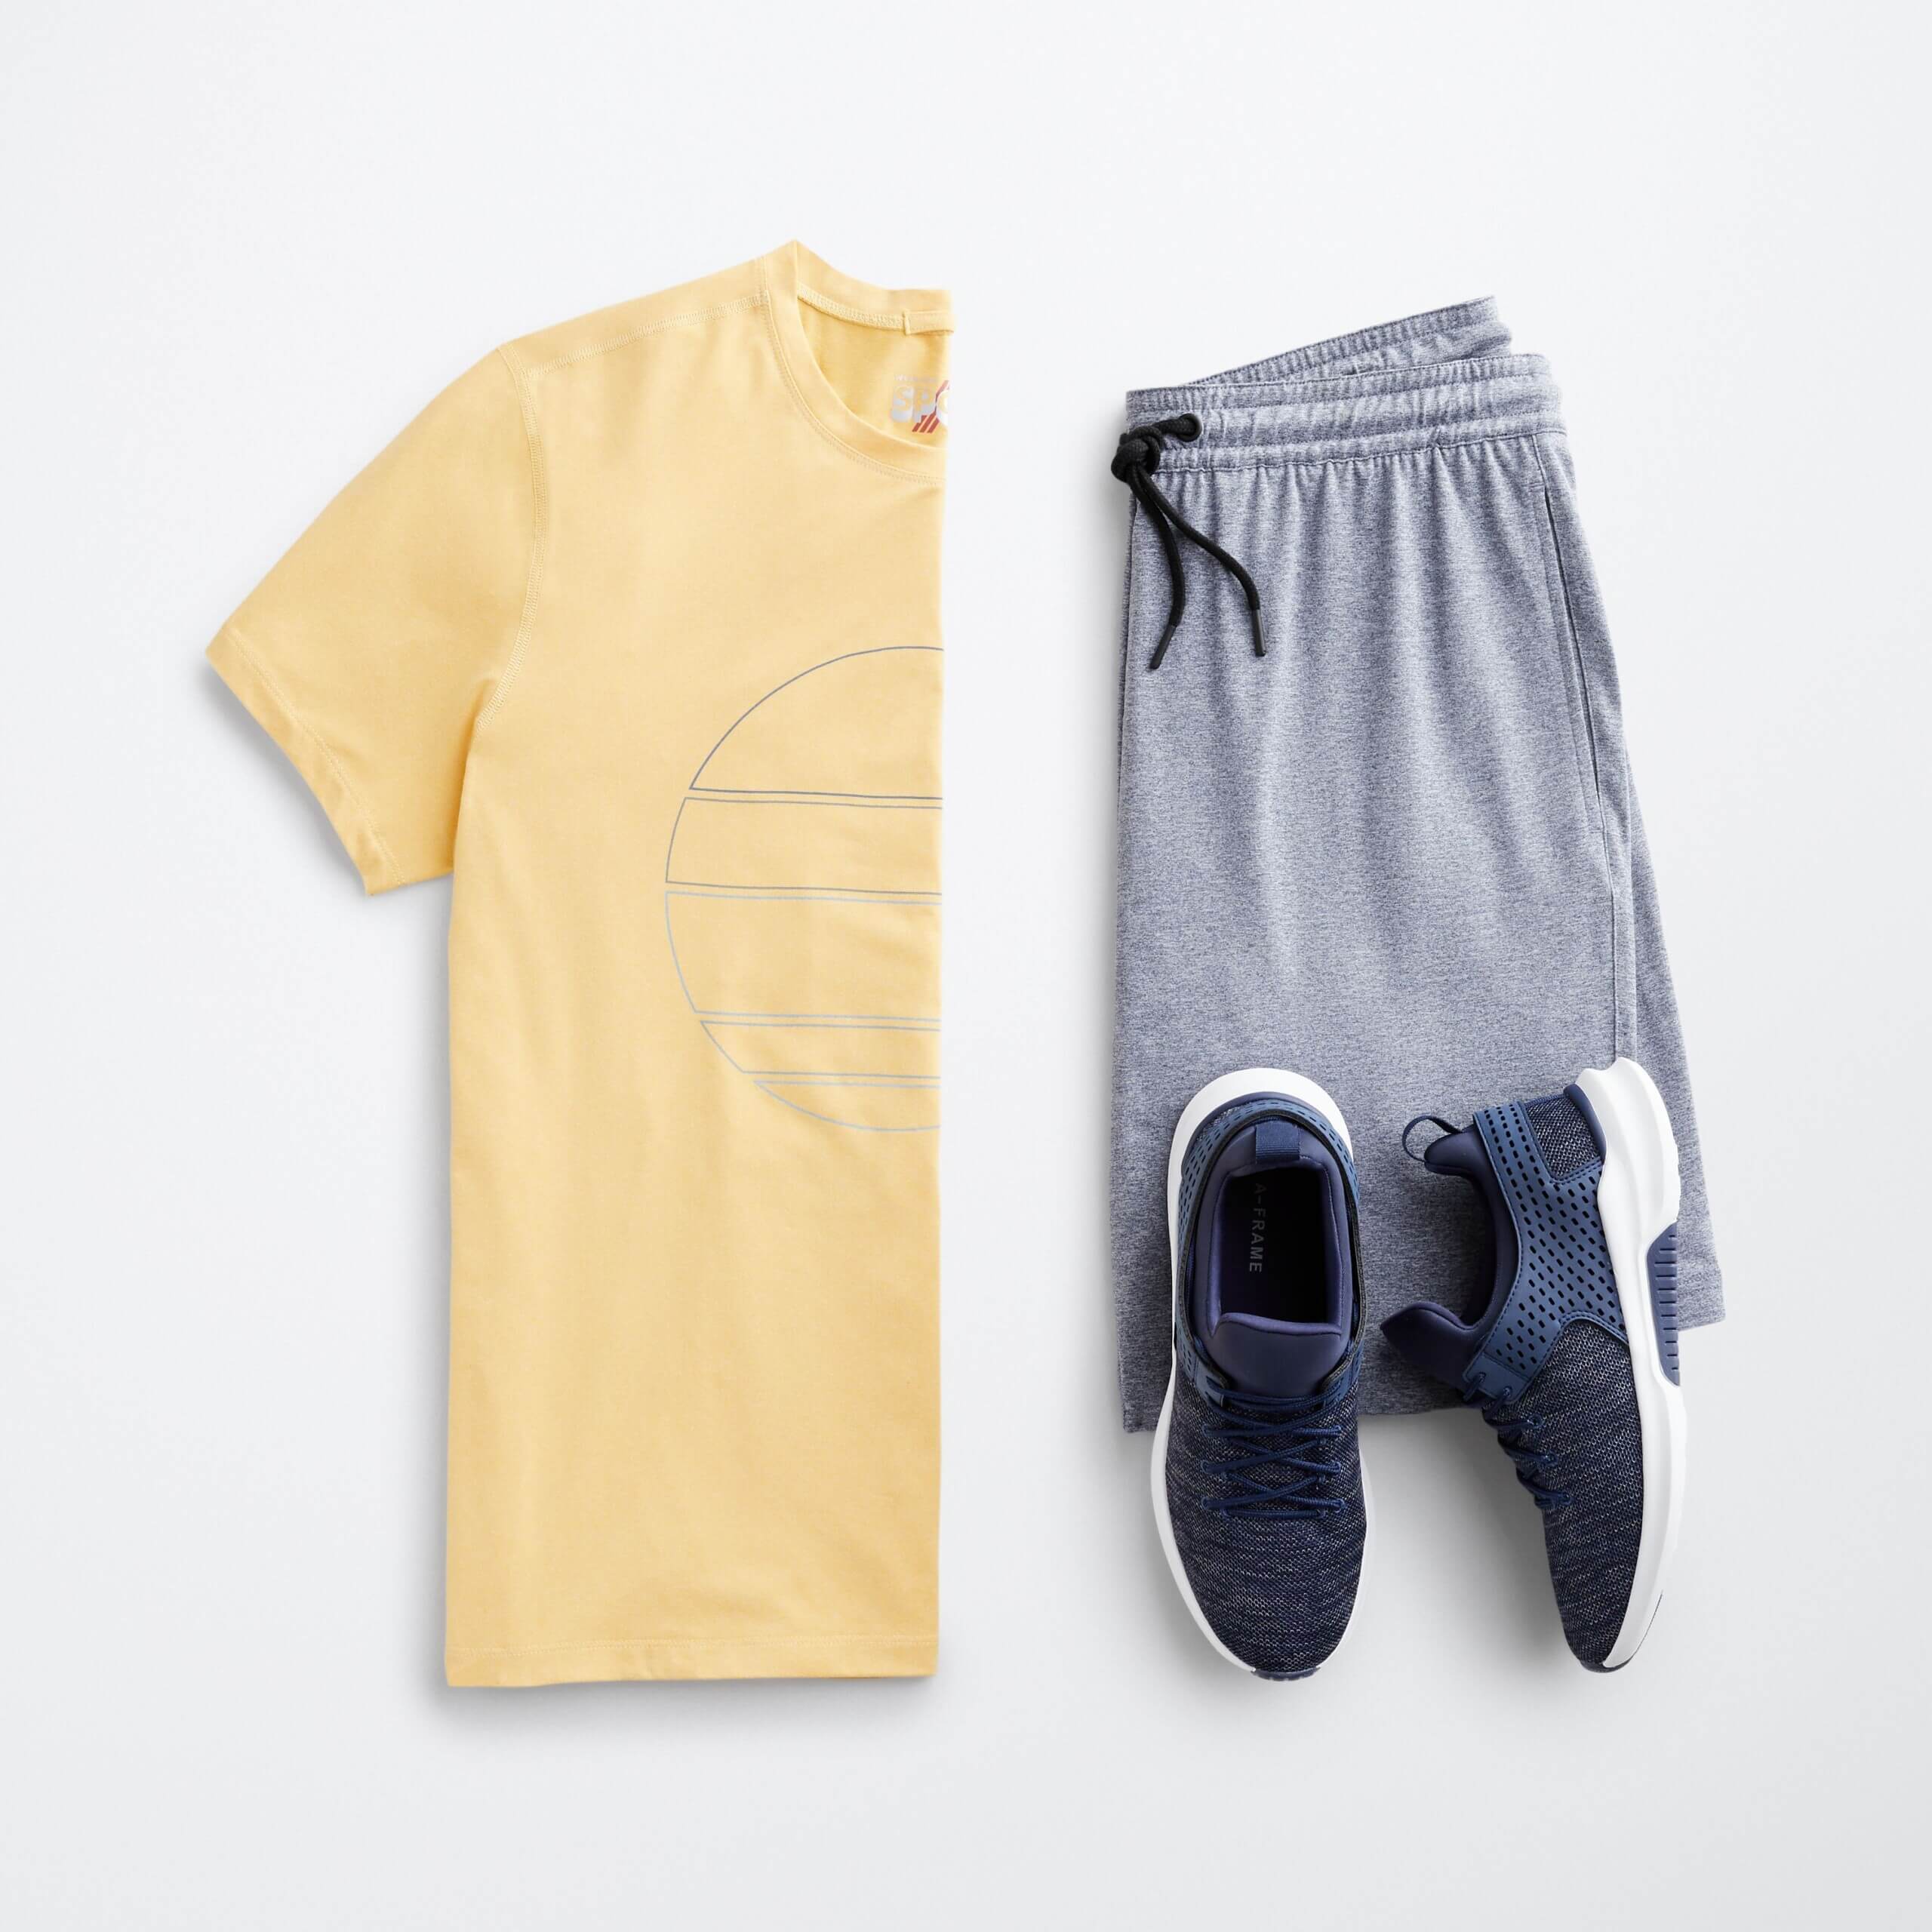 Stitch Fix men's outfit laydown featuring yellow graphic tee, grey athletic shorts and black sneakers. 